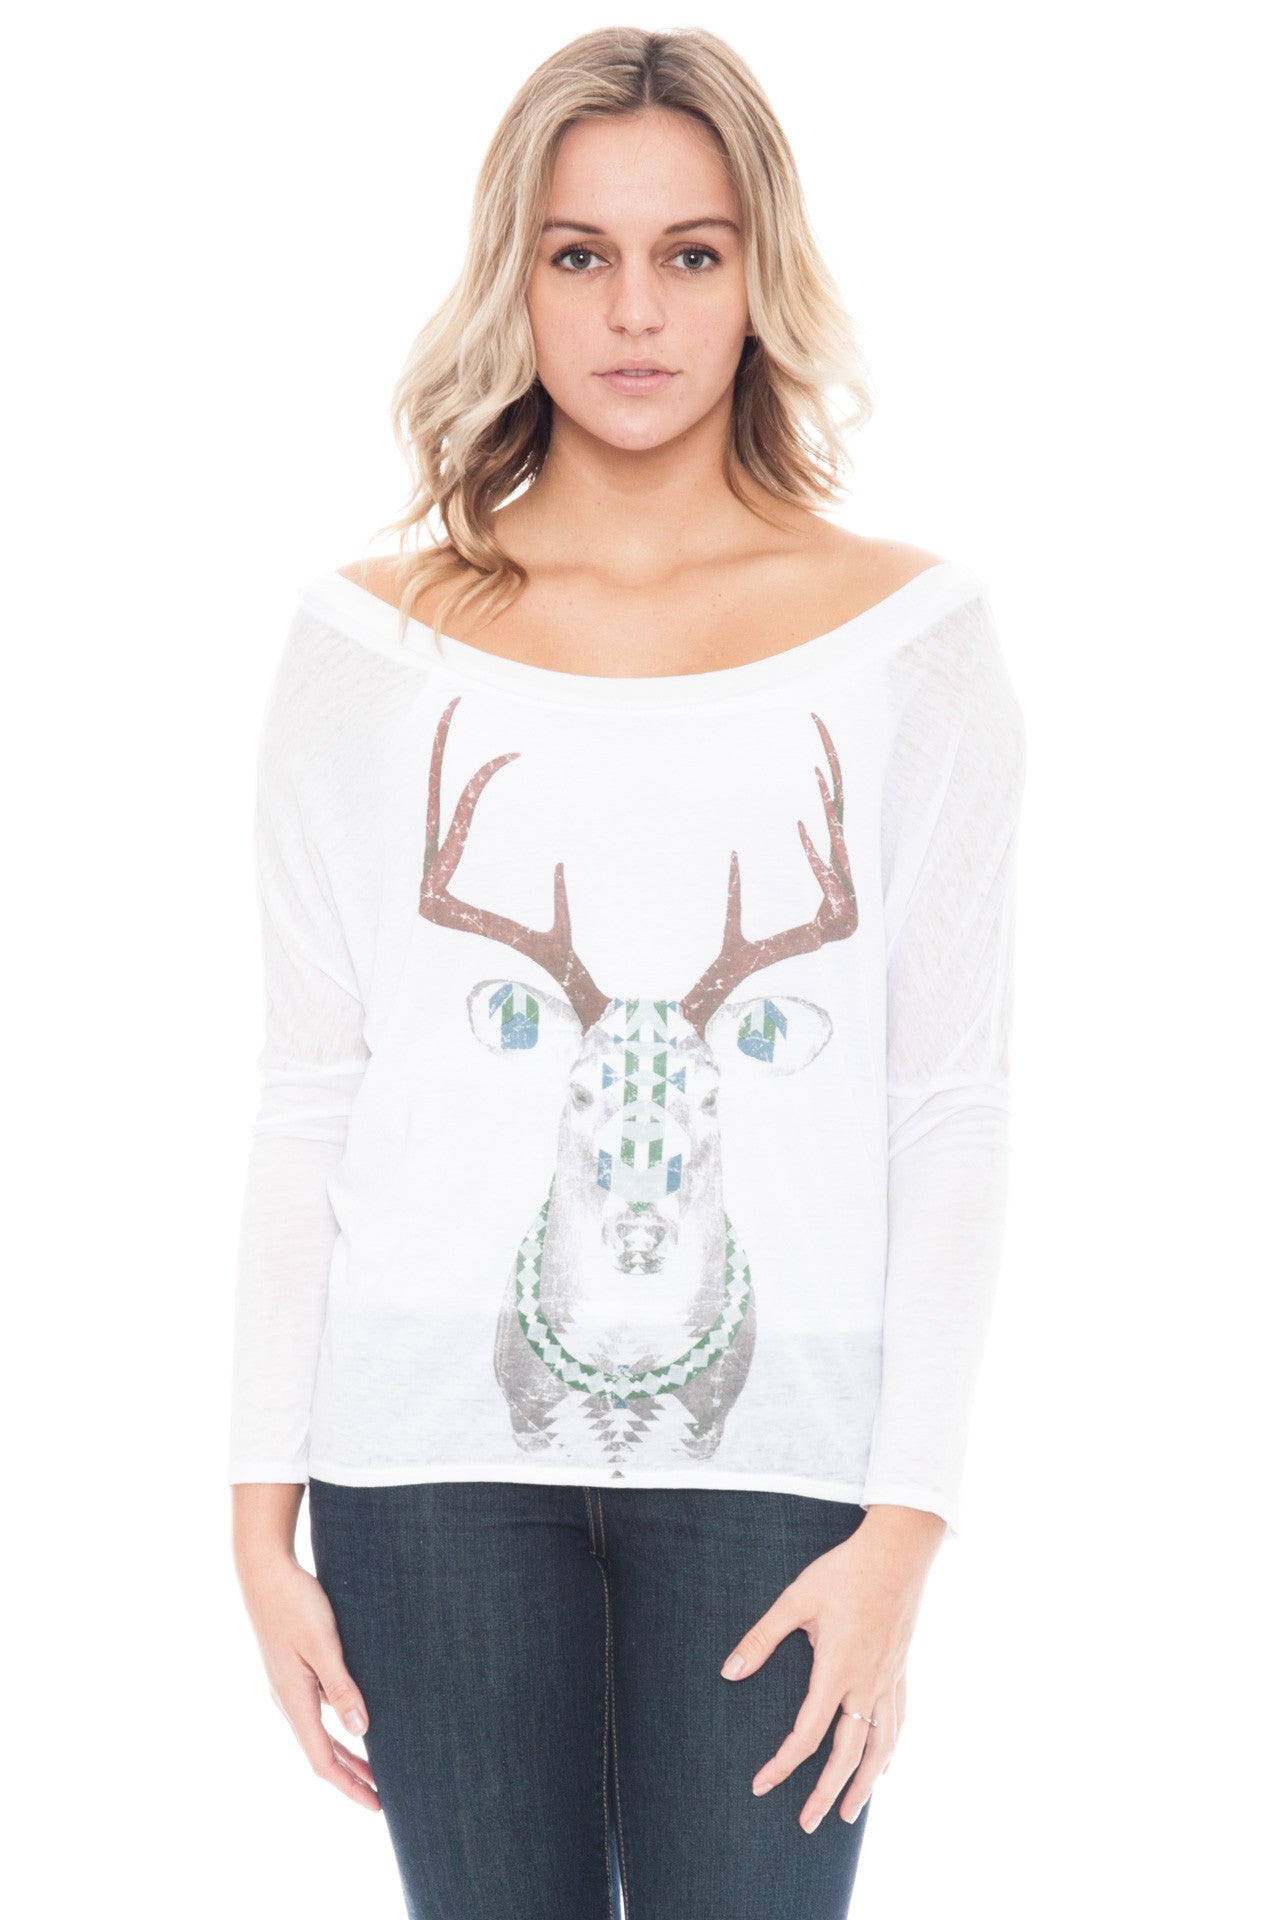 Shirt - Semi Sheer Painted Deer Top by Chaser